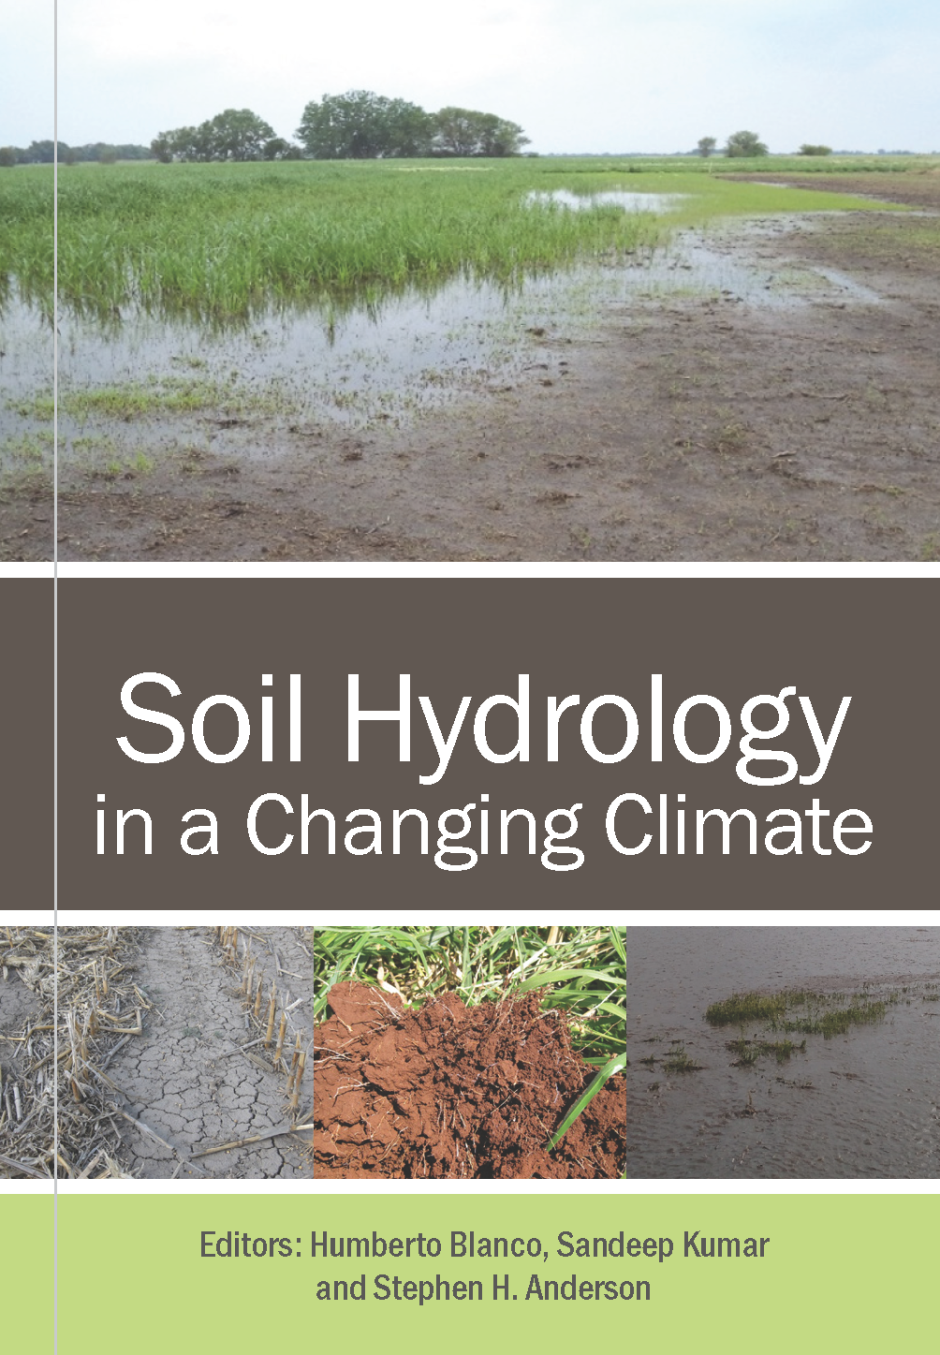 “Soil Hydrology in a Changing Climate” Stephen Anderson